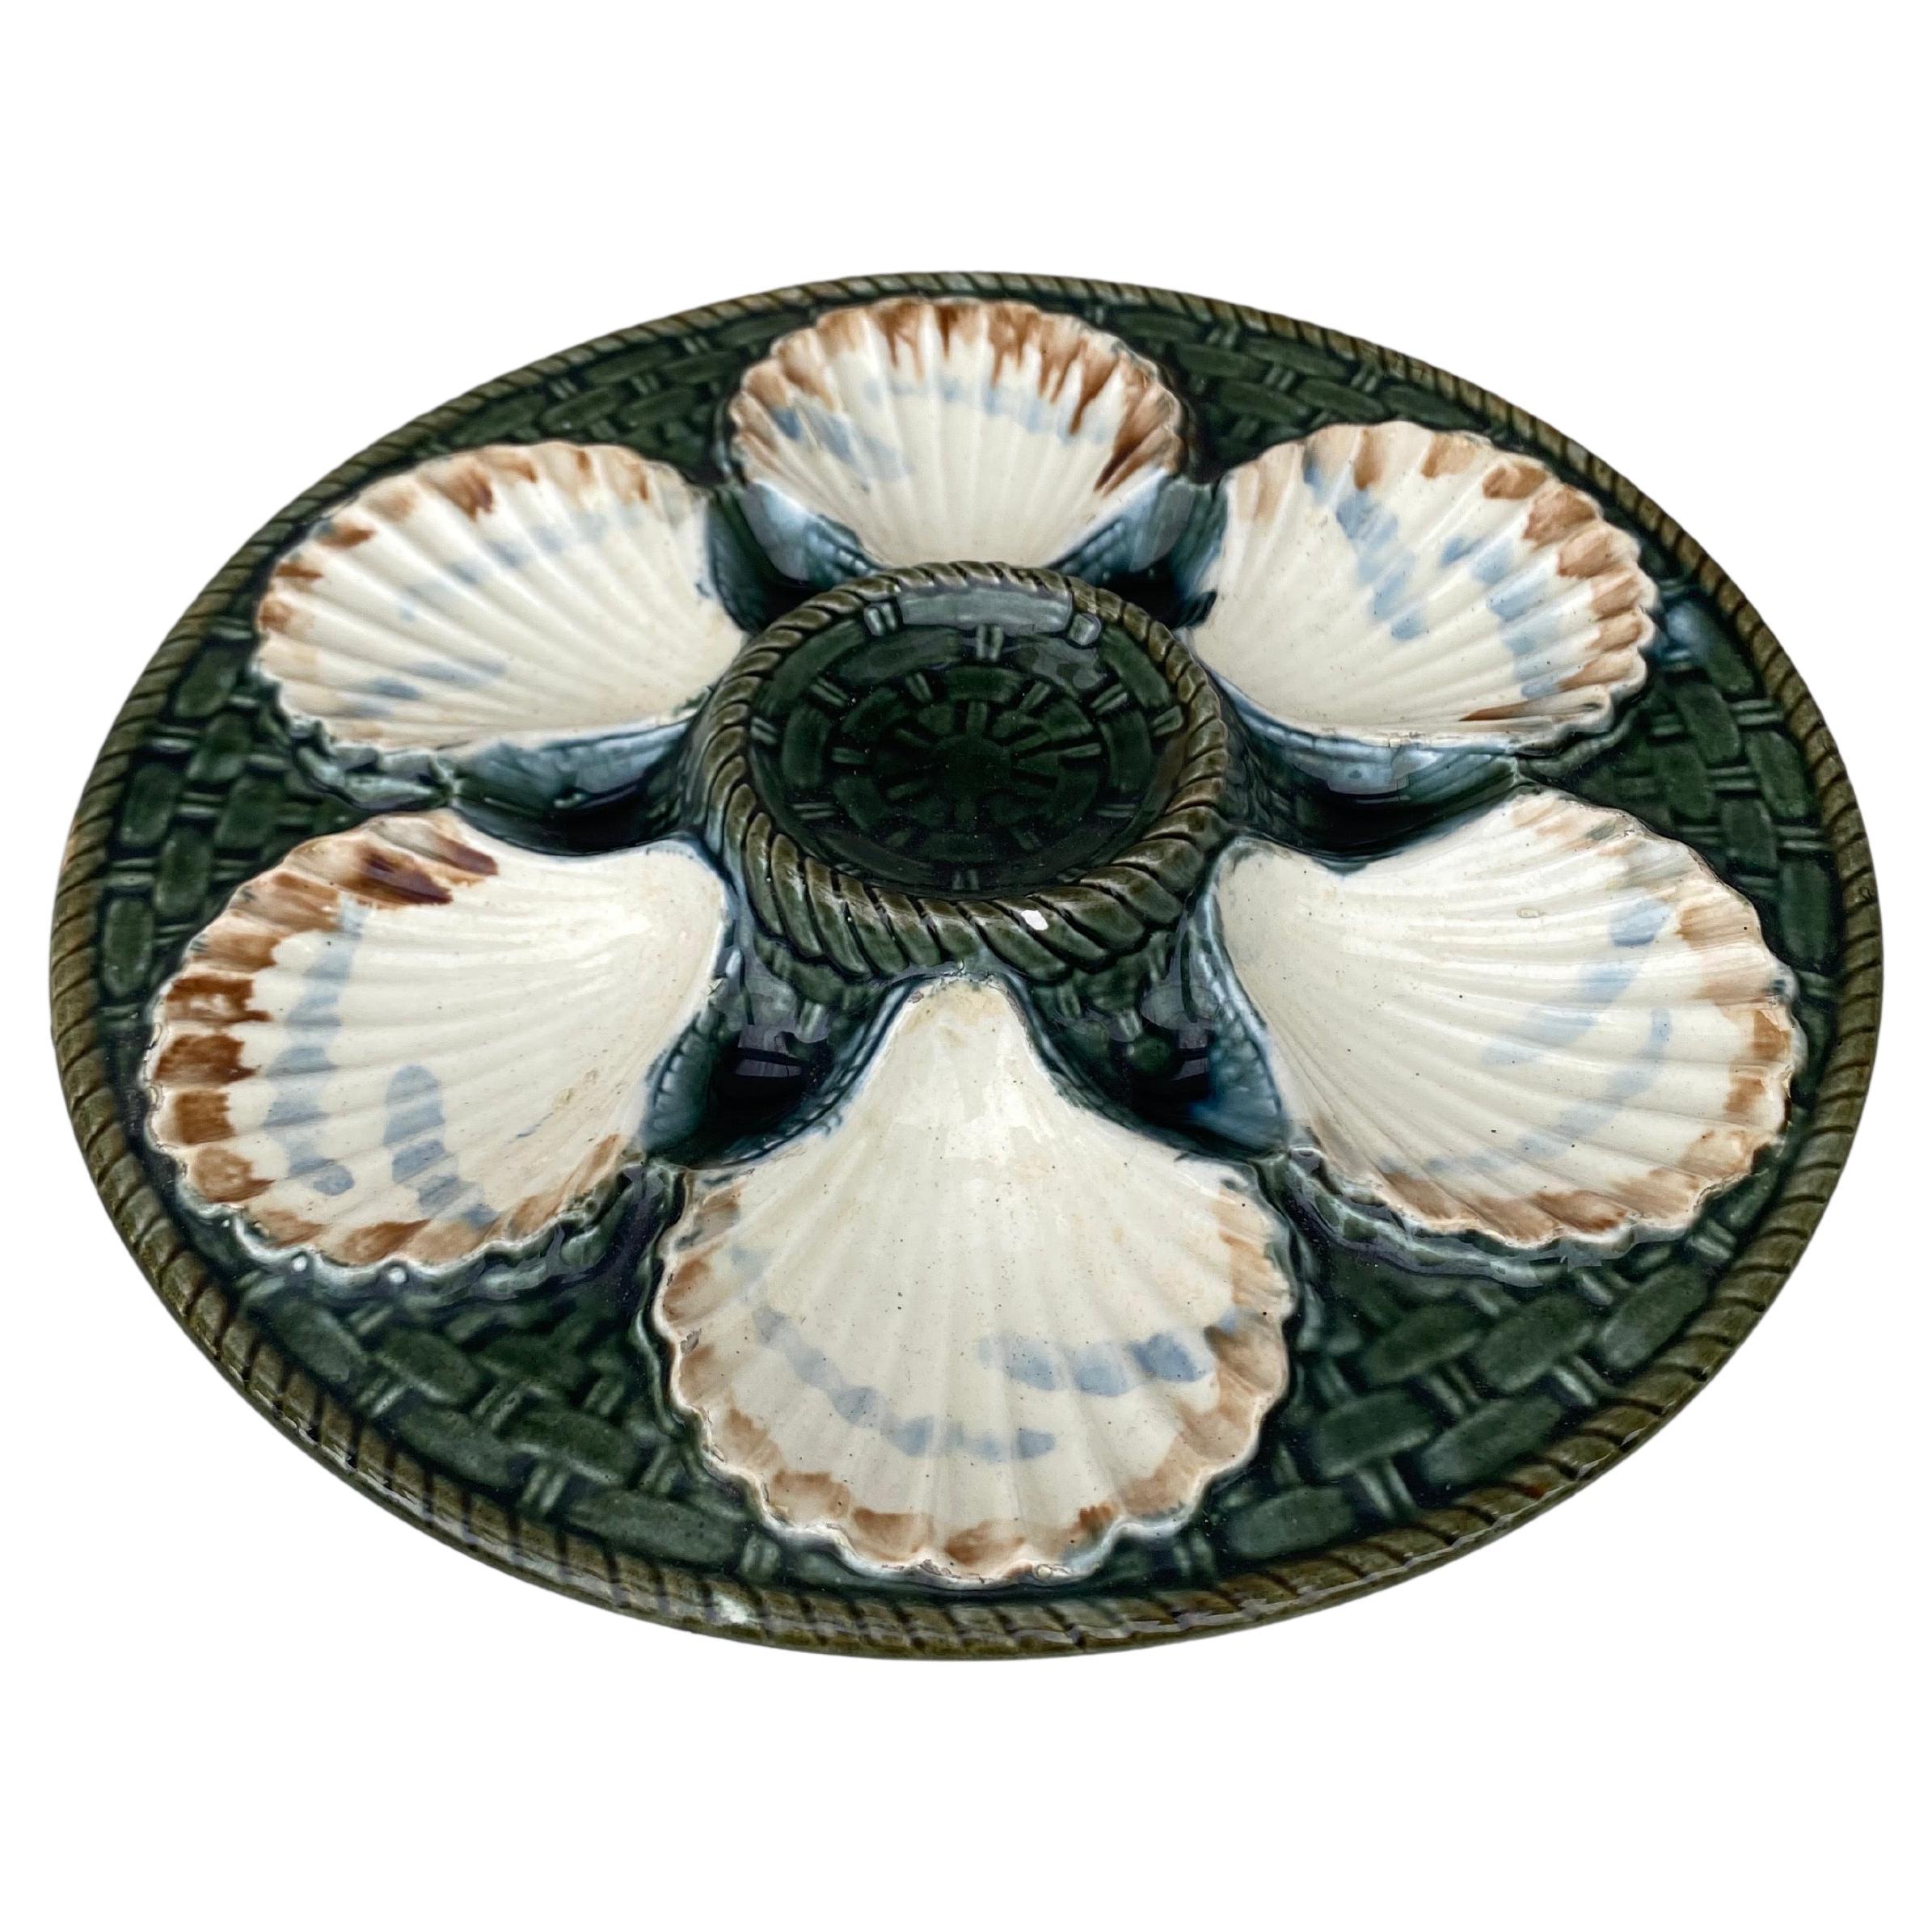 Green Majolica oyster plate, six white wells on a green basket weave, circa 1890 signed Longchamp.